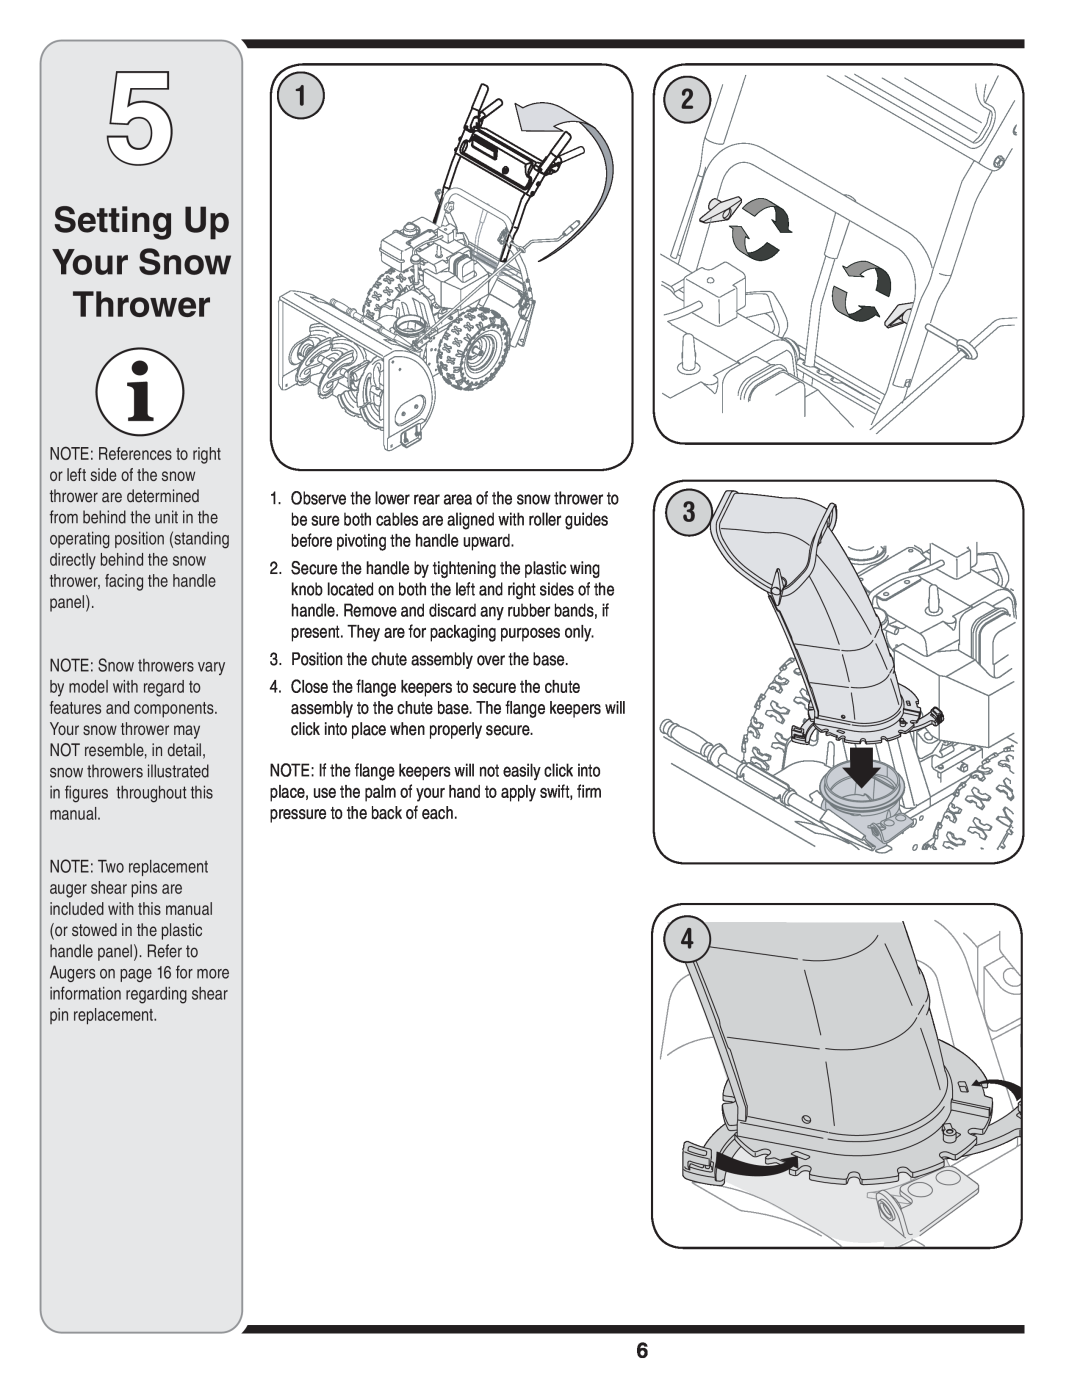 MTD D Style, C Style warranty Setting Up Your Snow Thrower, Position the chute assembly over the base 